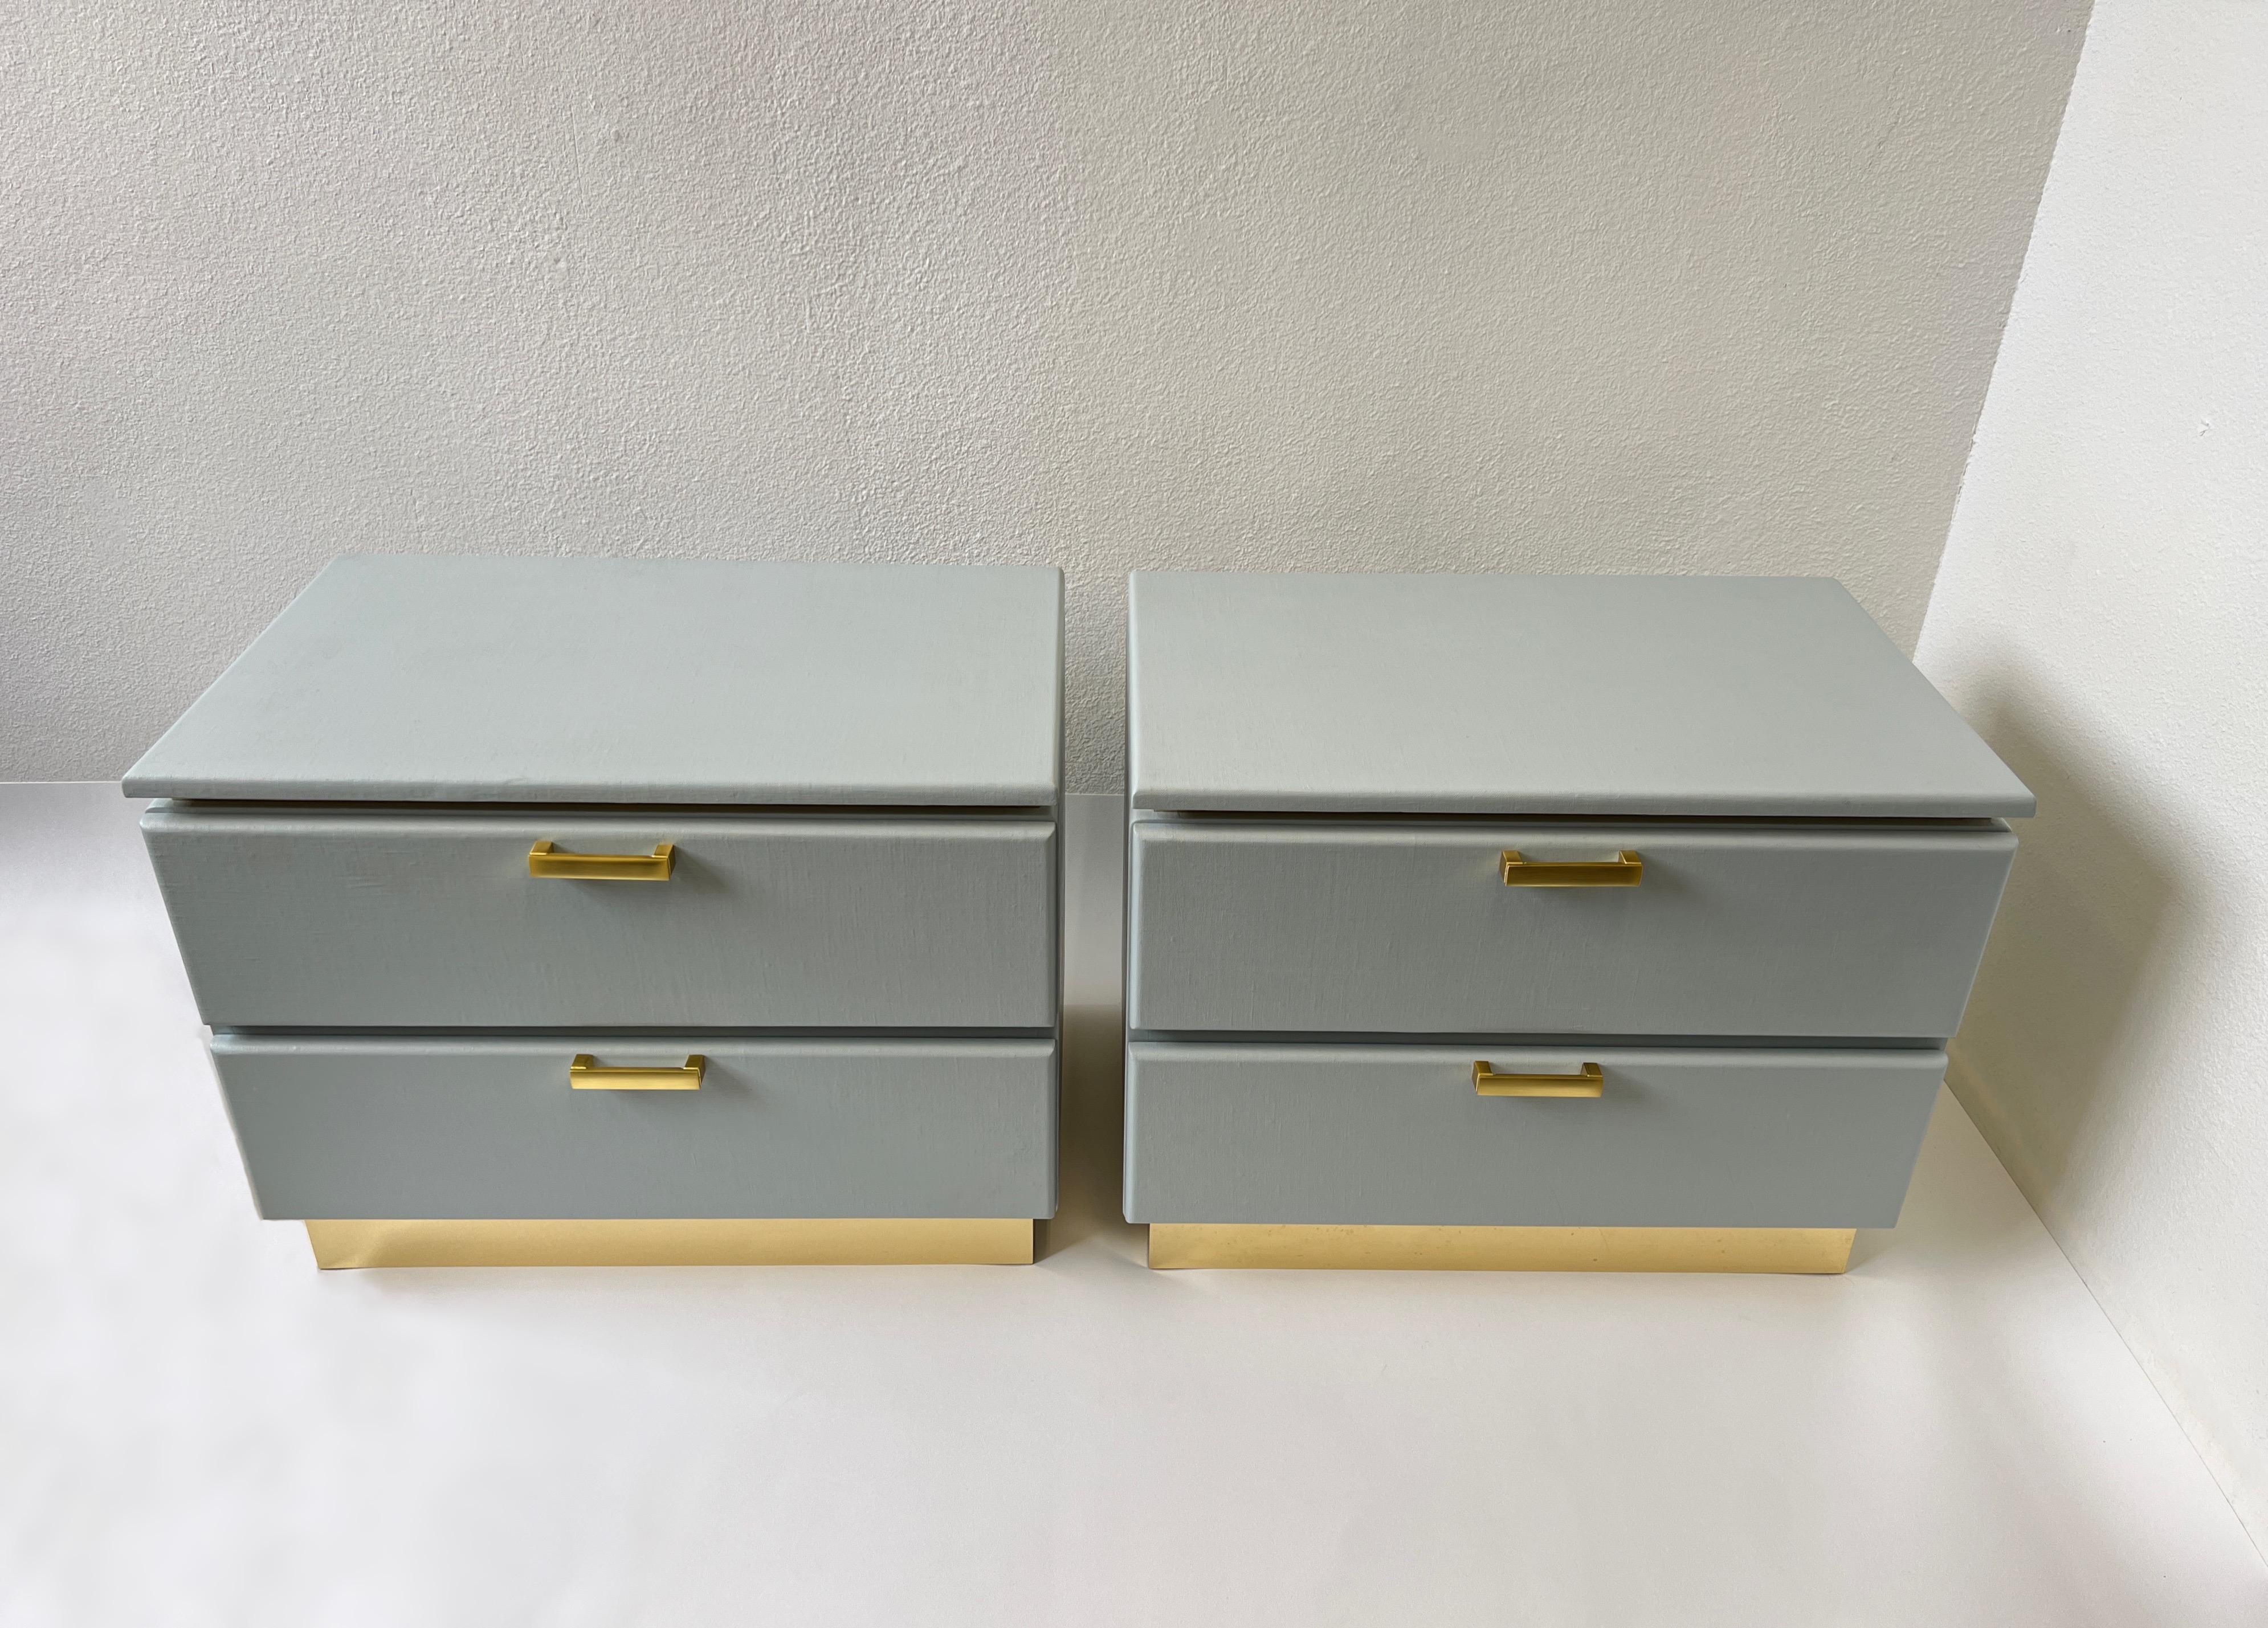 1980’s Pair of custom light bluish gray and brass lacquered nightstands for Steve Chase. 
Constructed of wood wrapped in lacquered linen, with brass details. 
In beautiful vintage condition, shows minor wear consistent with age. 
Measurements: